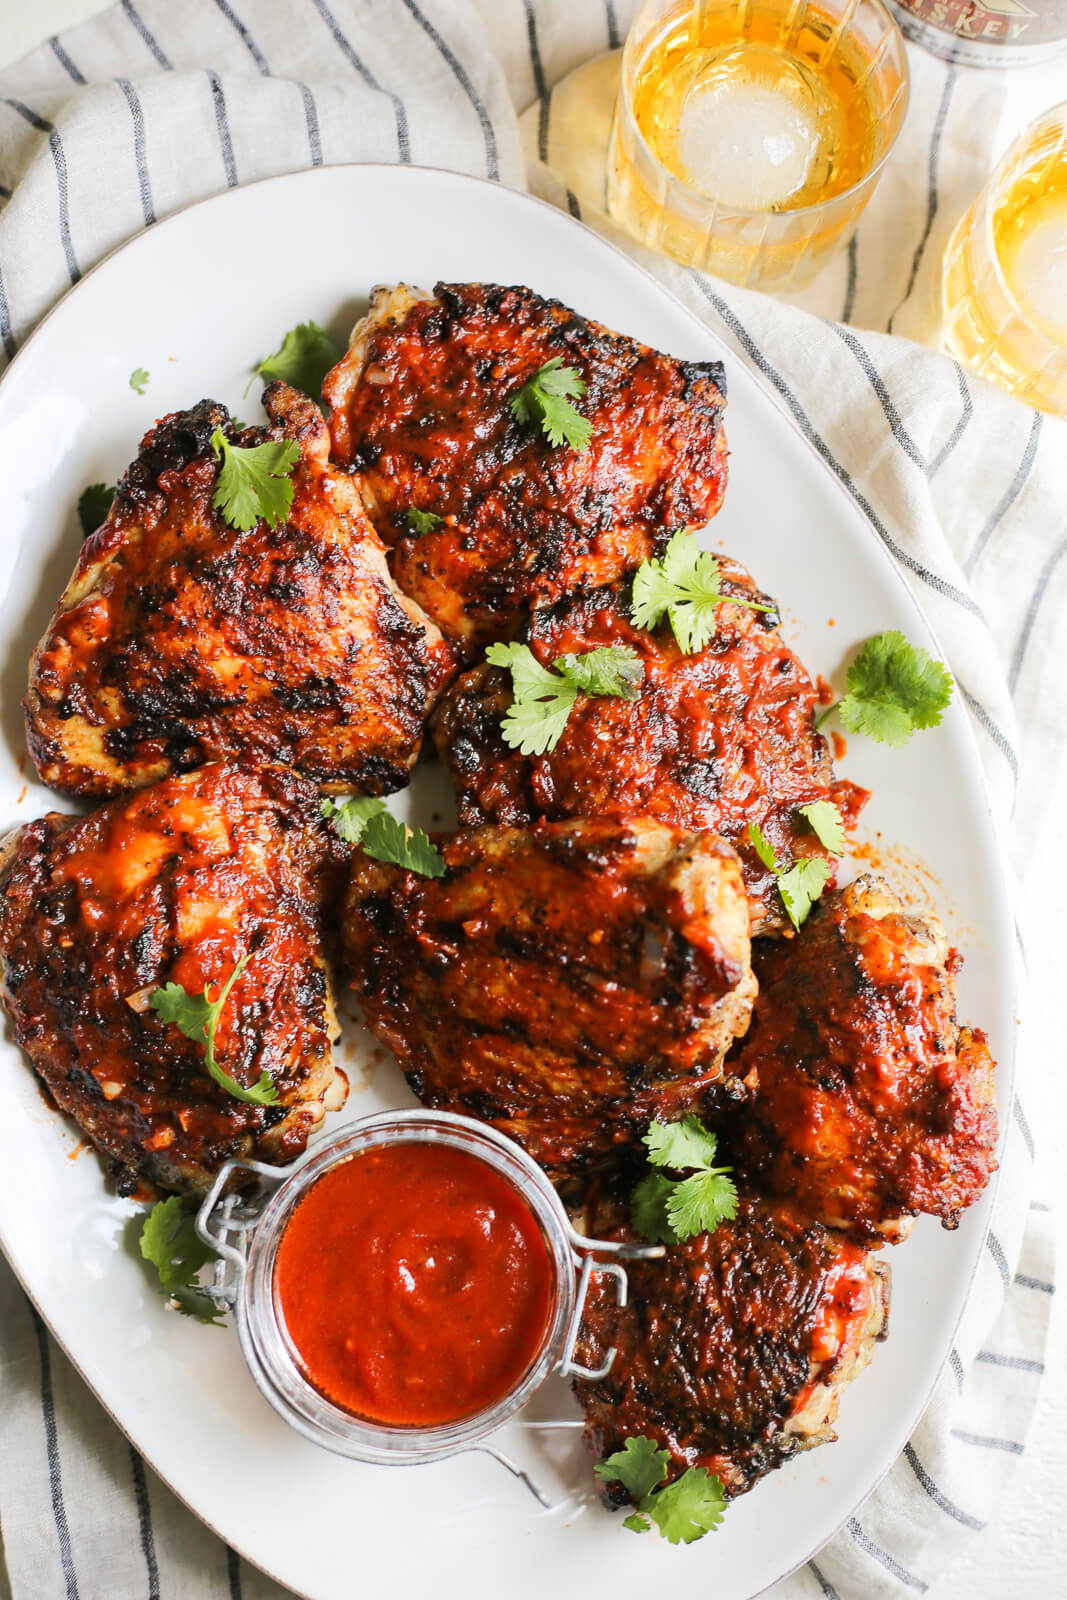 15+ Delicious Grilled Chicken Recipes   Real Simple Good